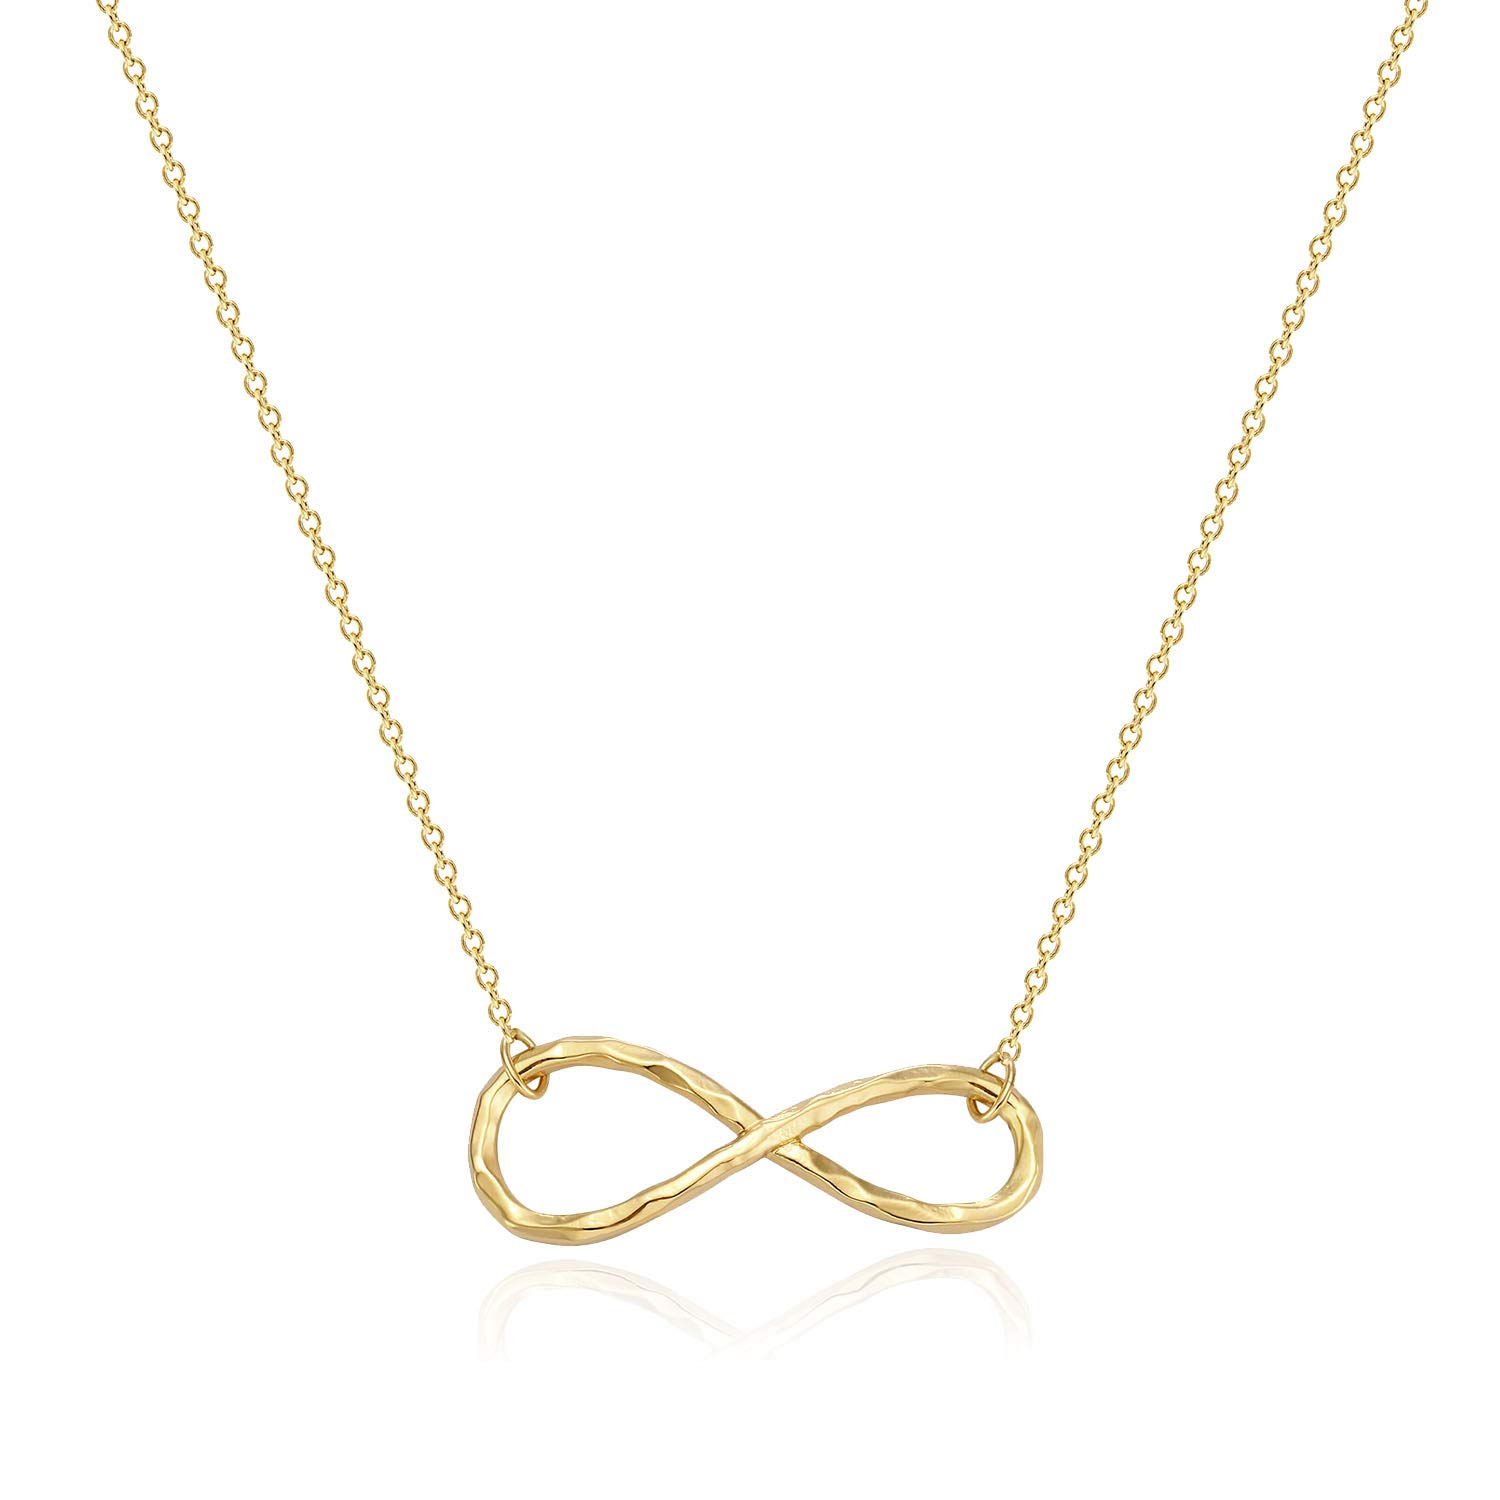 Fettero 14K Gold Plated Simple Double Circle Interlocking Infinity Hammered Pendant Necklace for Women Jewelry Gift - image 1 of 5